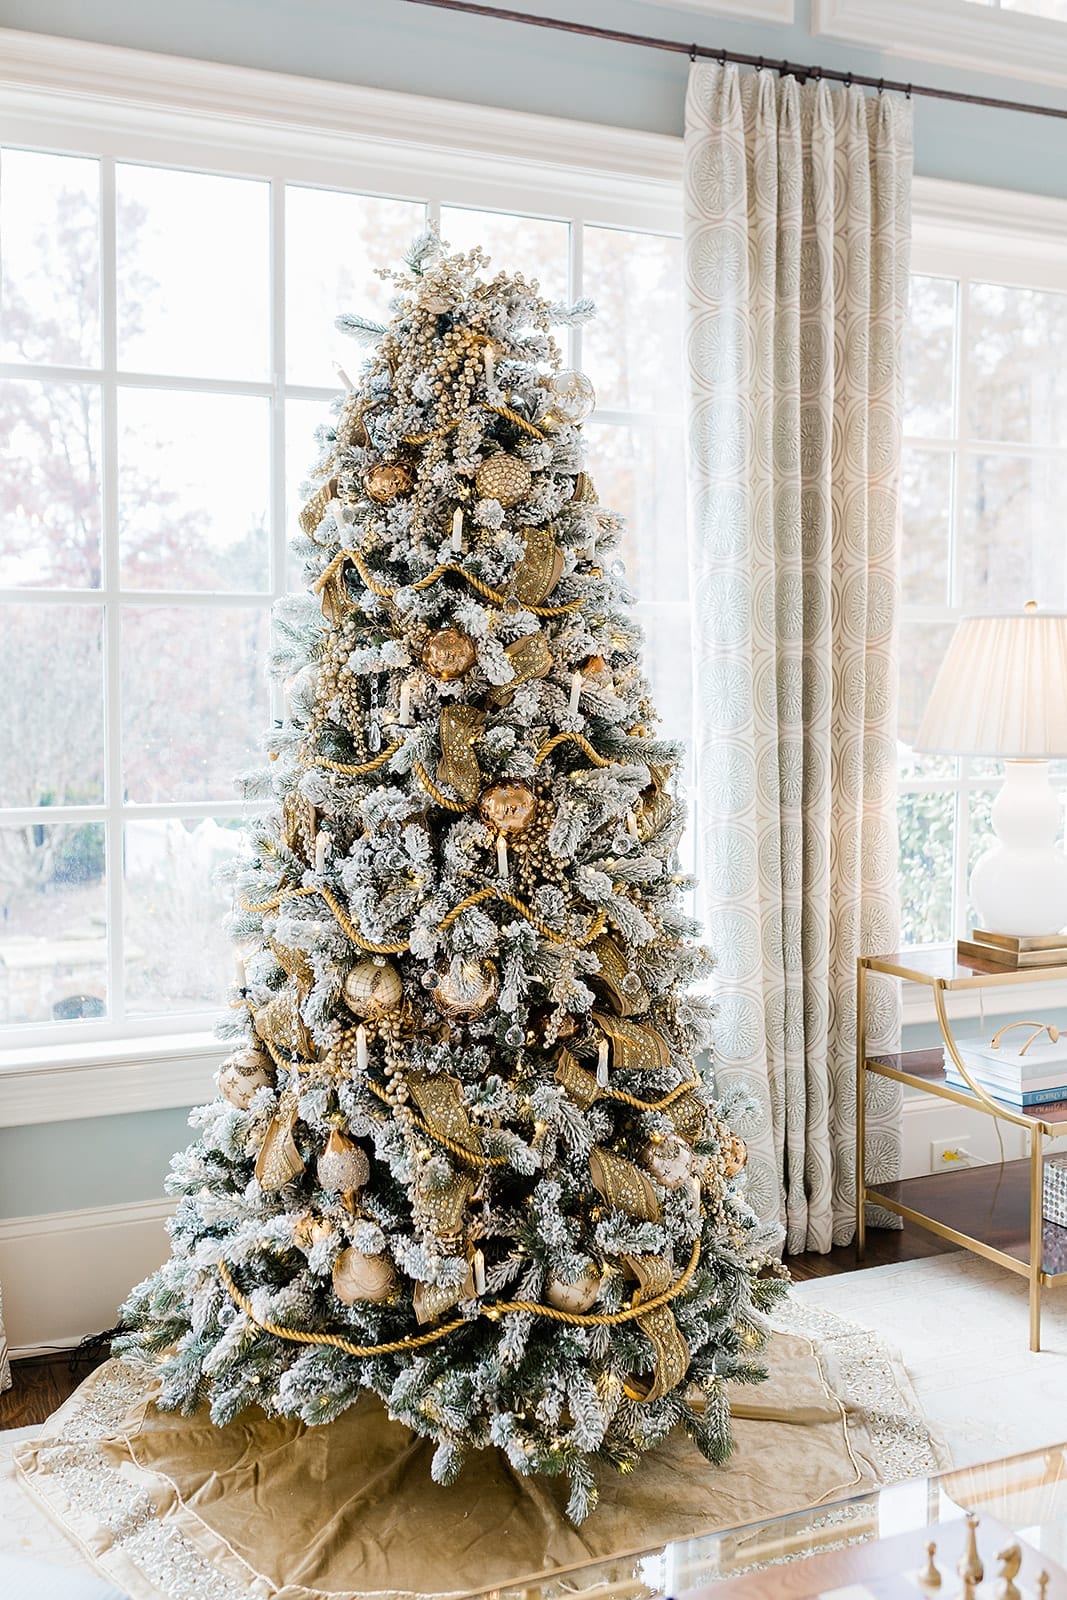 Last year I decorated a Gold Christmas tree for our sunroom. I used opulent Gold Christmas Tree ornaments and Gold Christmas tree decorations for a posh & glam look! I'll share great lookalike options for the Gold Ribbon for Christmas tree, and Gold ornaments so you can recreate it!